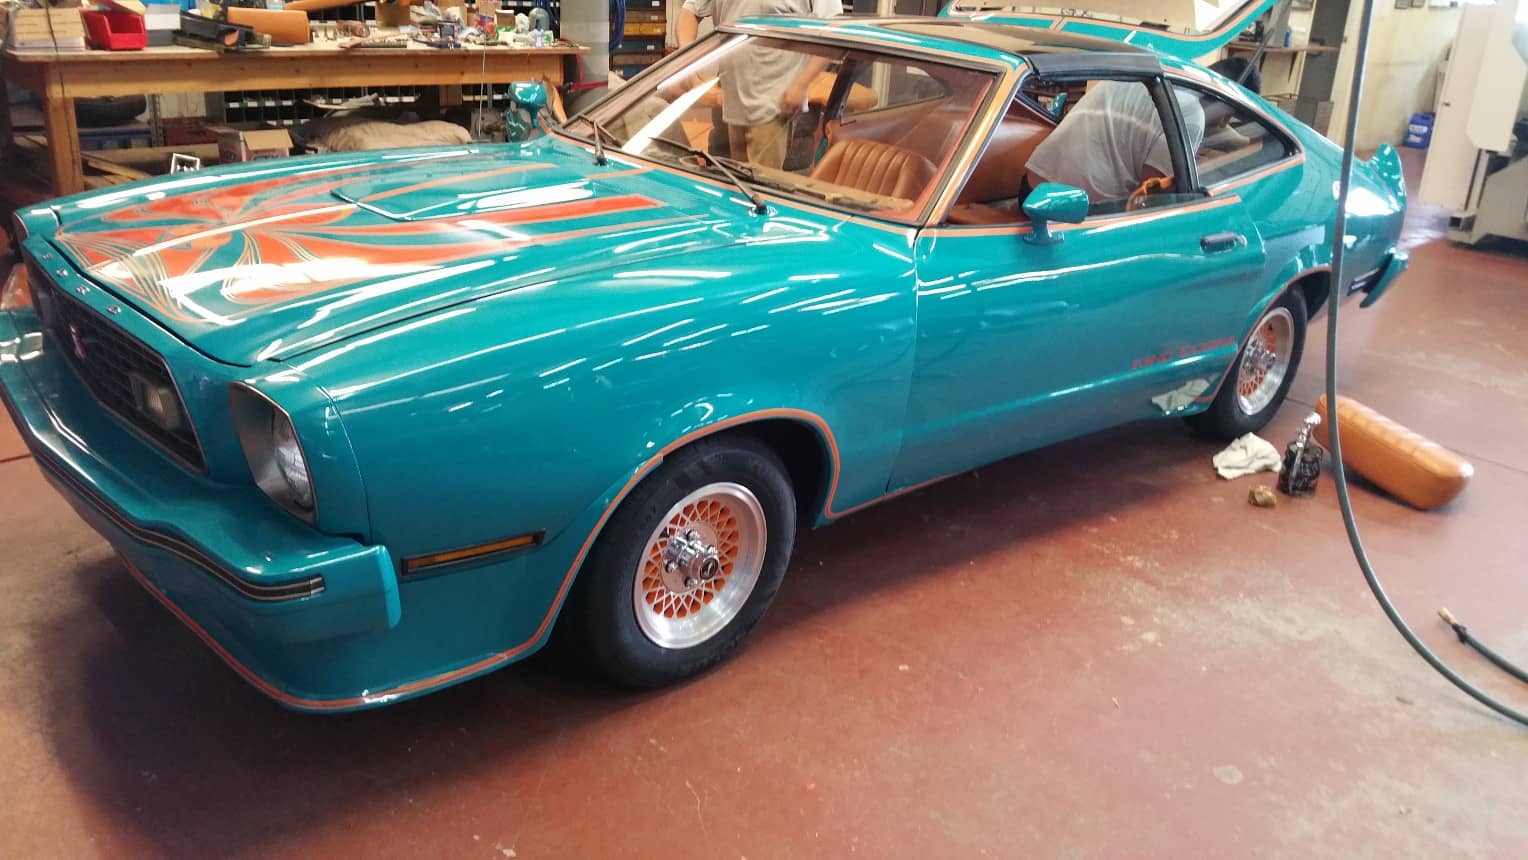 Guardians of the Galaxy movie car restoration finishing up